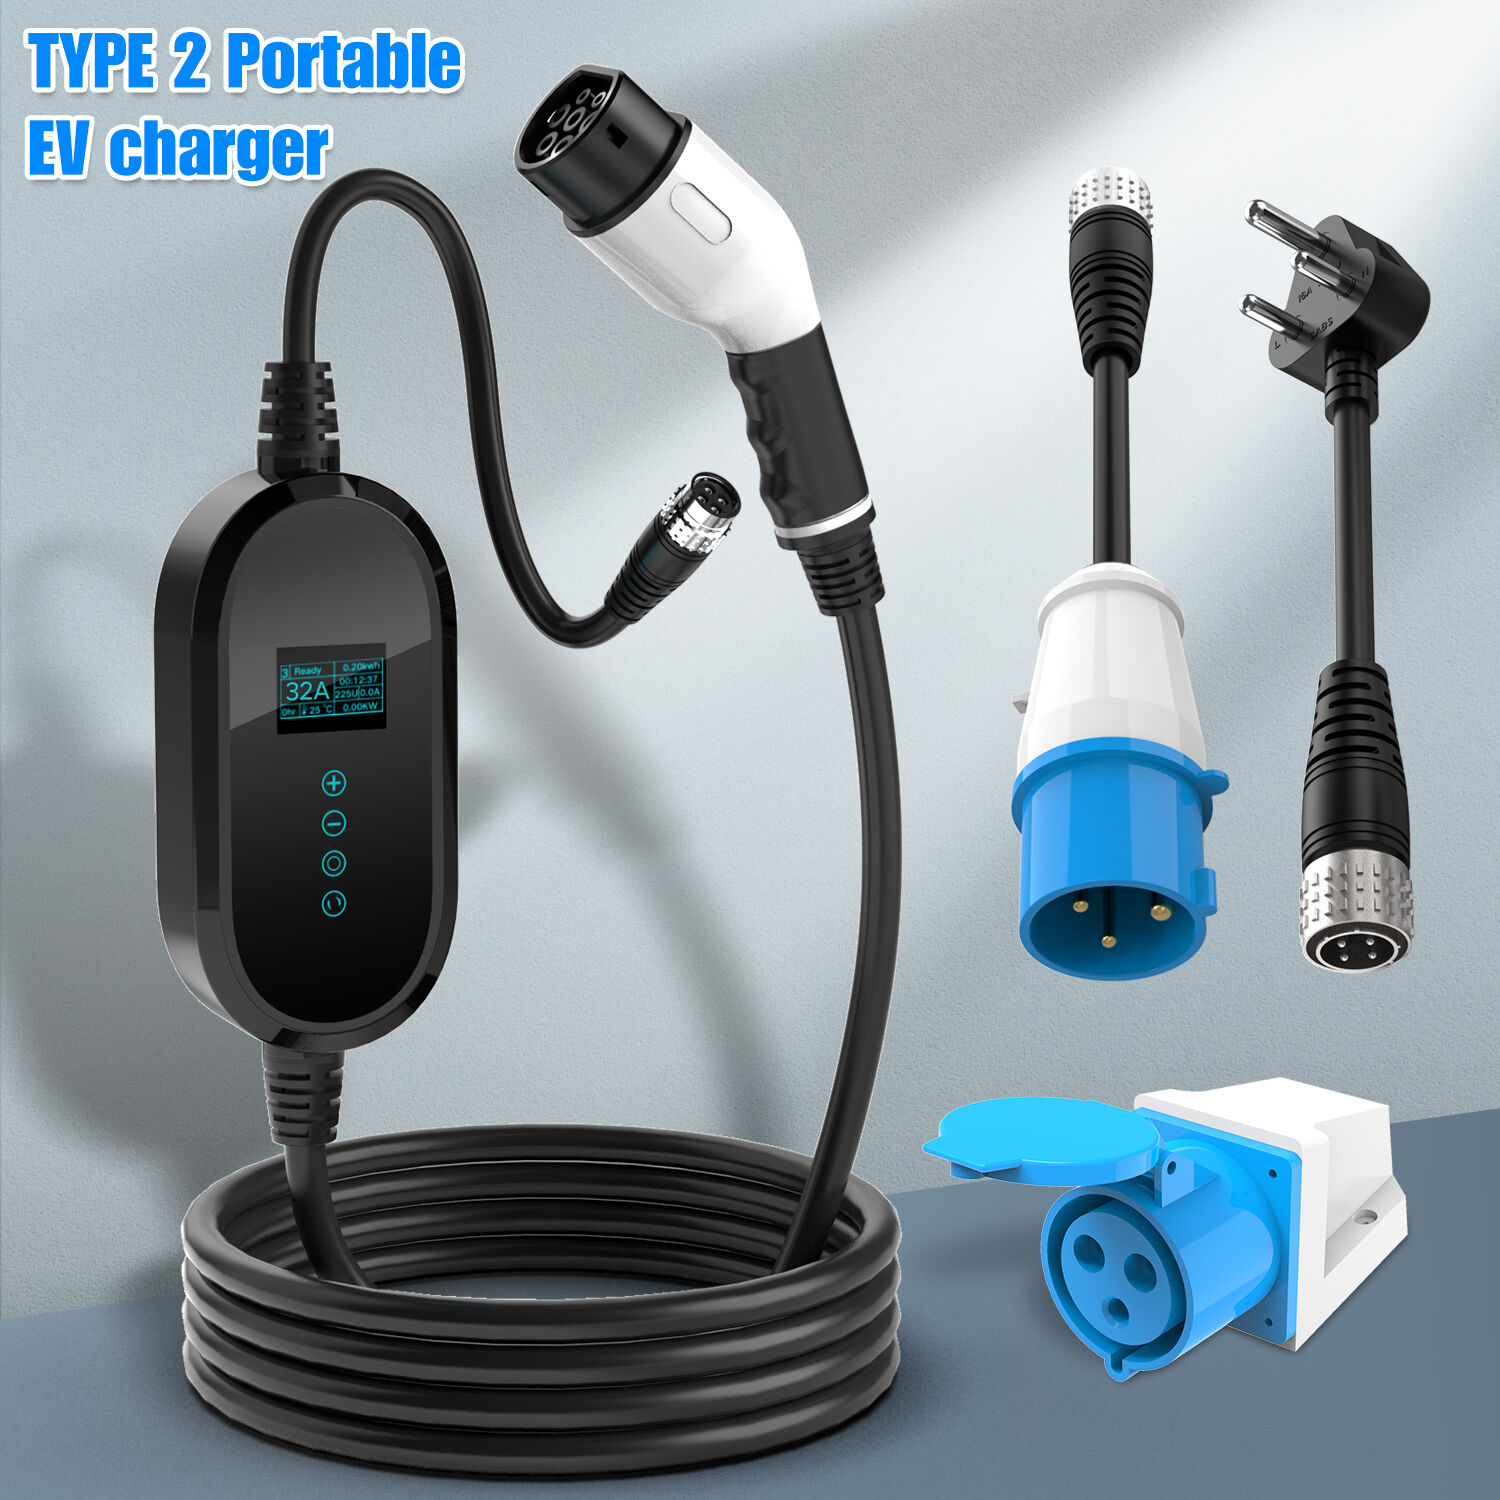 Customized Portable Ev Charger 32a Type2 Manufacturers, Suppliers